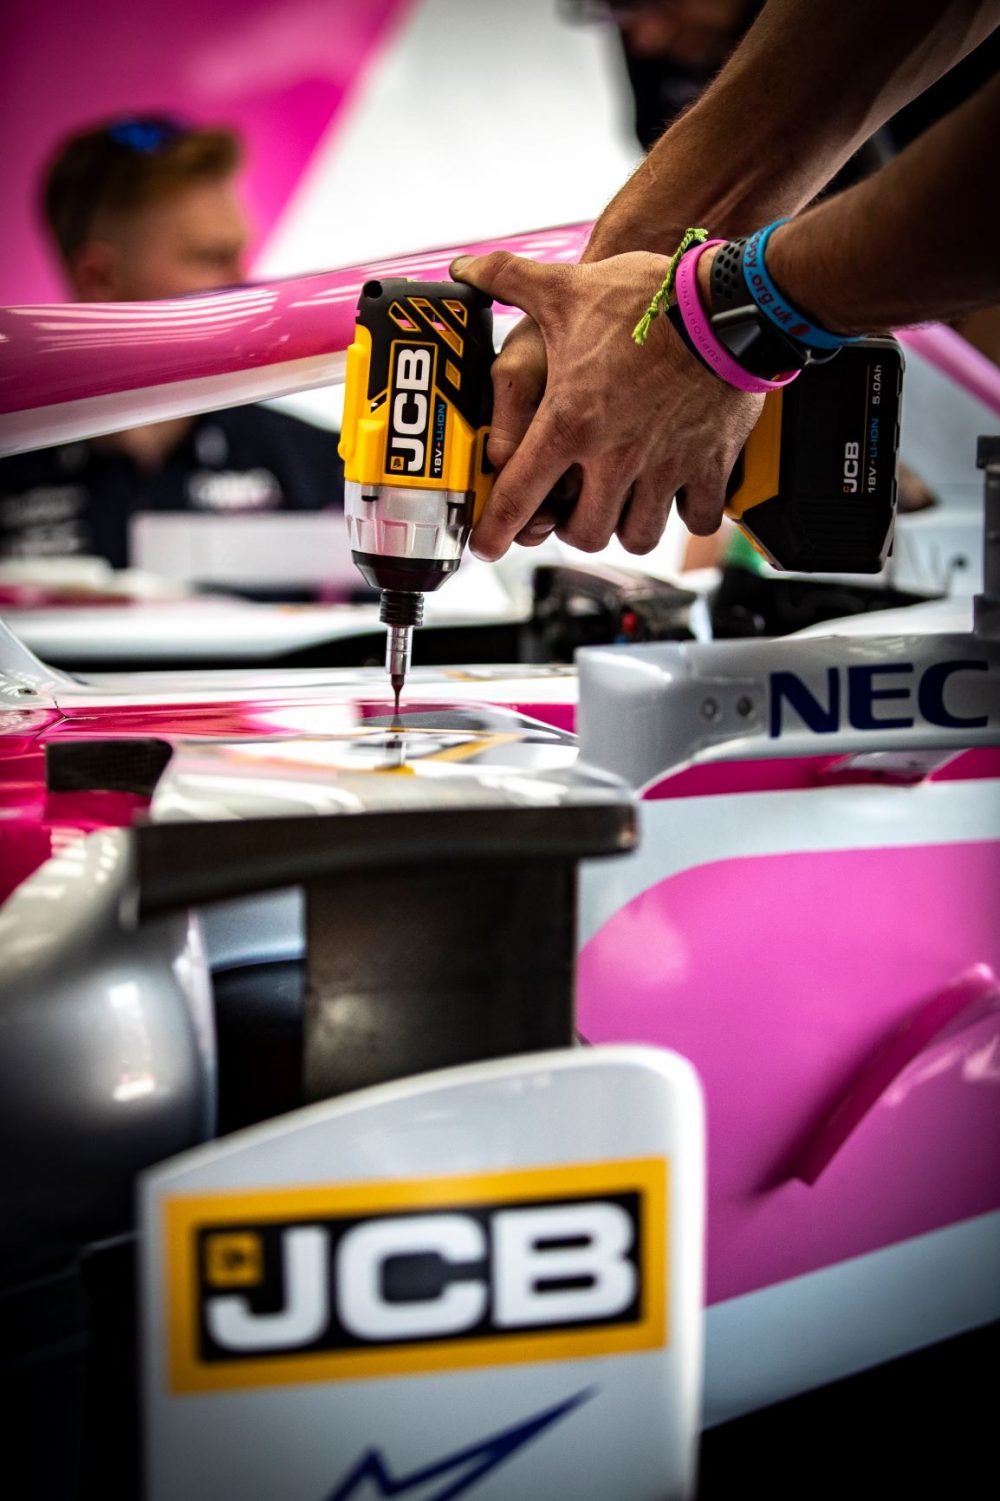 A SportPesa Racing Point F1 team engineer puts the new JCB tools to the test